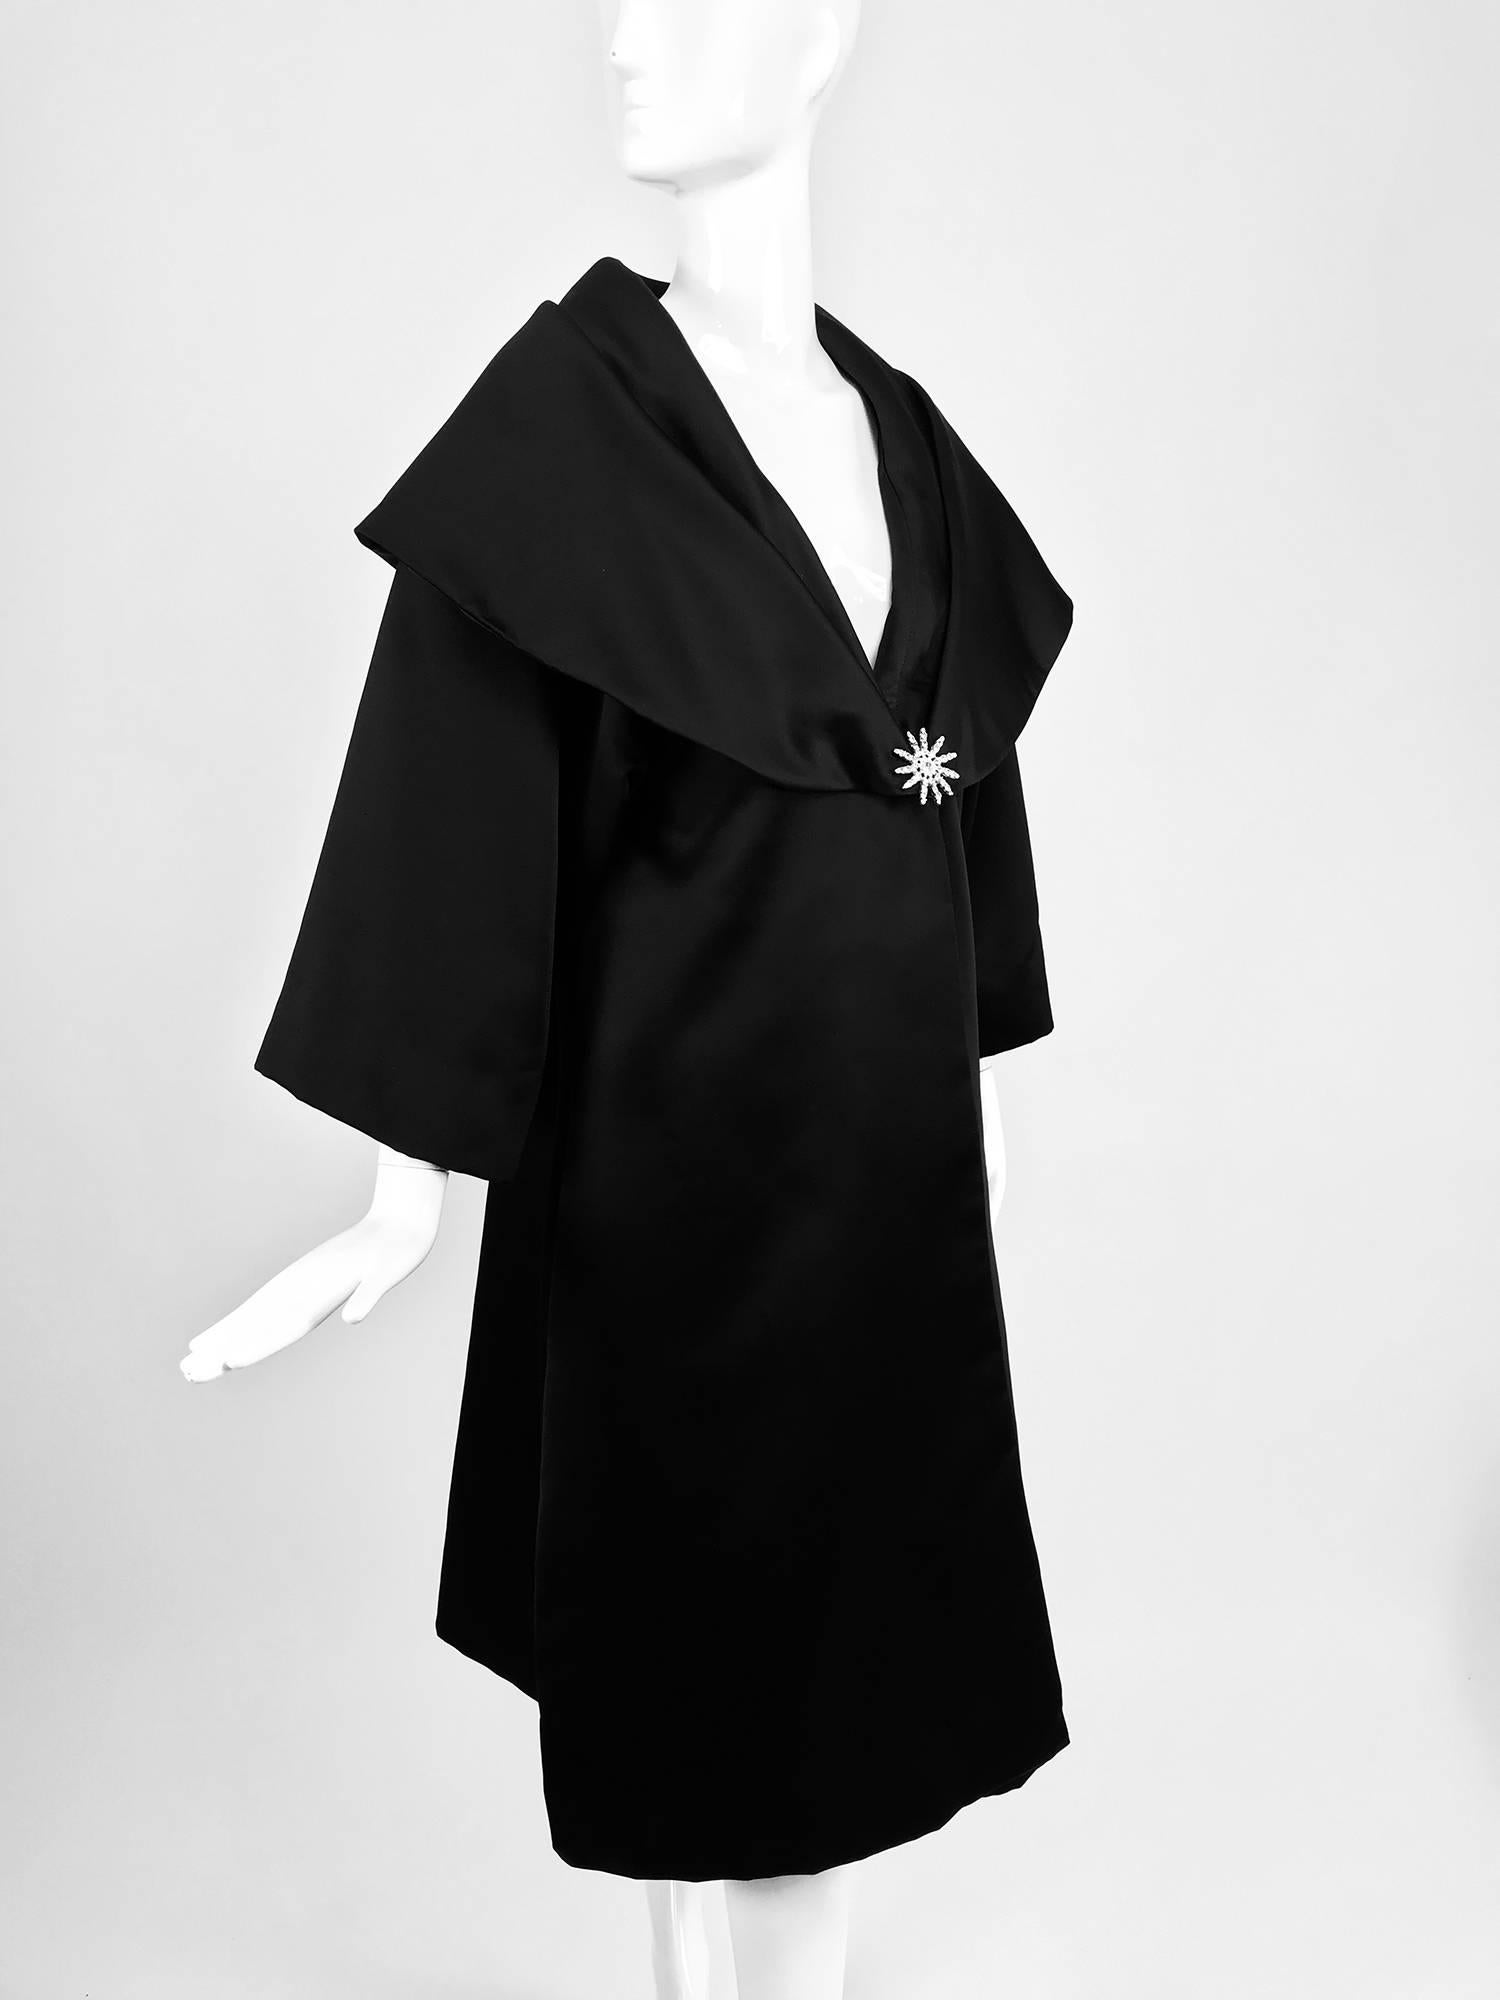 Carol Mignon Boutique Black portrait collar jewel closure evening coat from the 1980s...A beautiful coat that looks unworn...Portrait collar,crystal rhinestone jewel at the front closure...Bracelet length raglan sleeves...
In excellent wearable